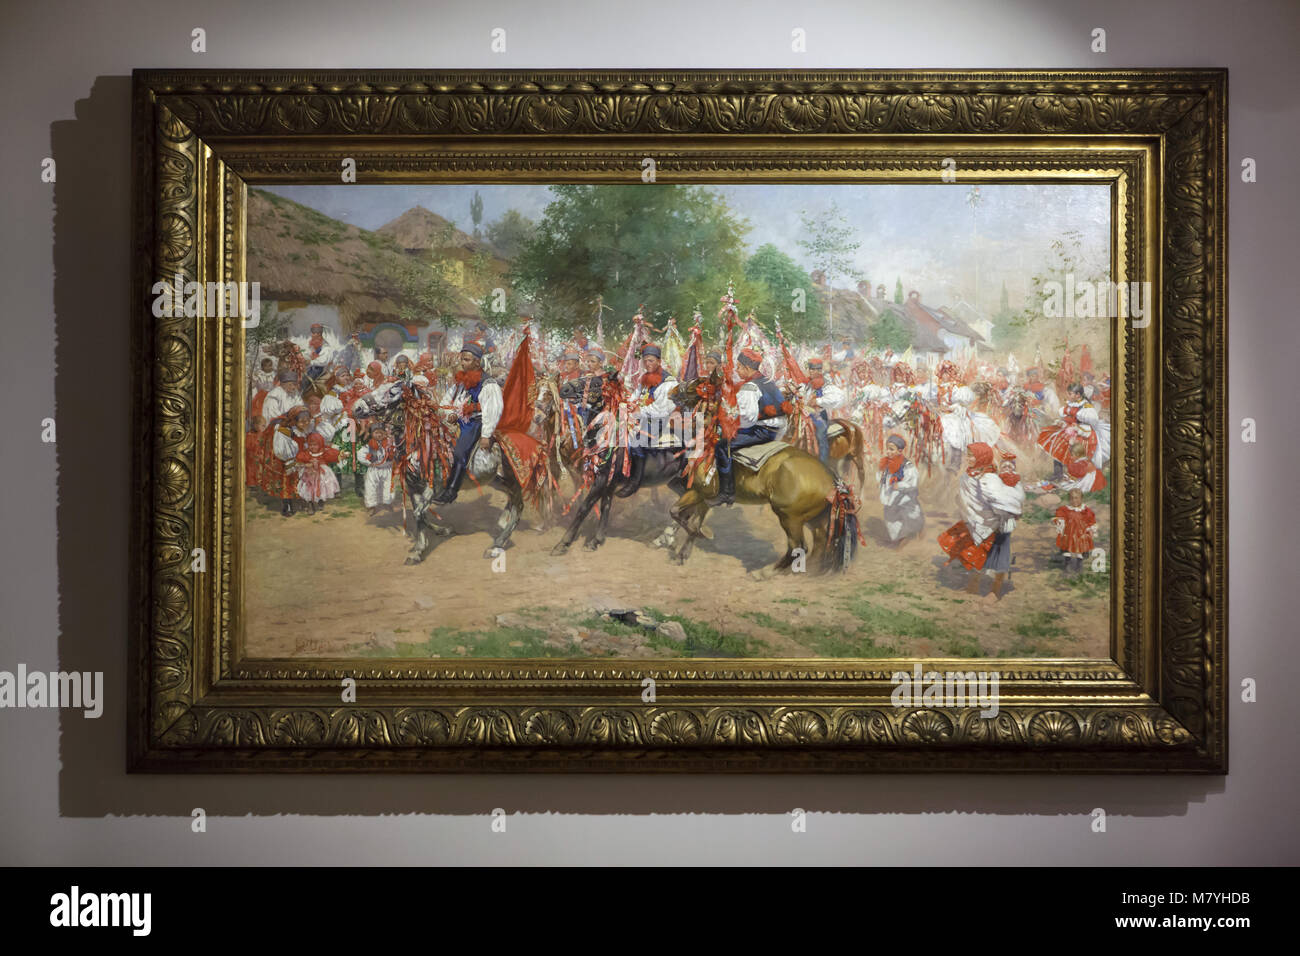 Painting 'Ride of the Kings' (1897) by Czech painter Joža Uprka on display in the Moravian Gallery (Moravská galerie) in Brno, Czech Republic. Stock Photo